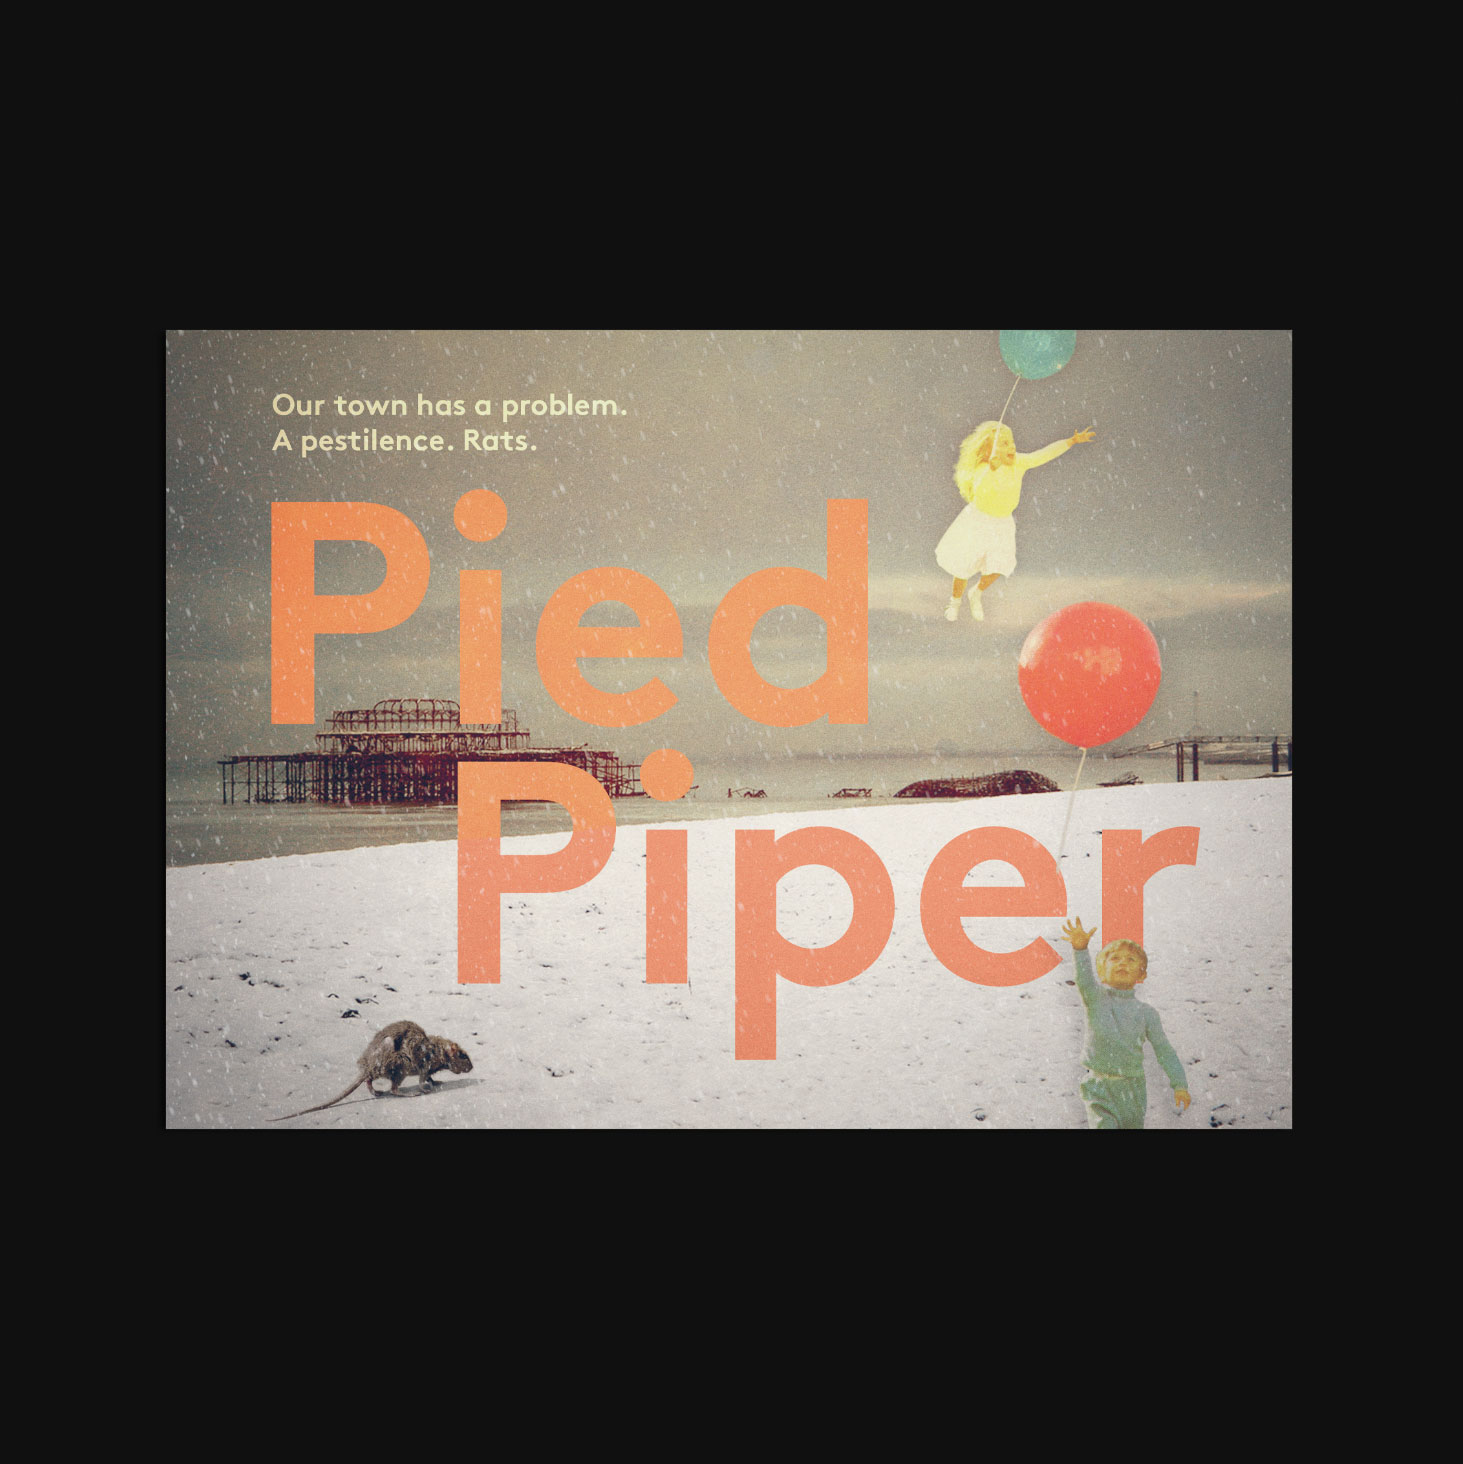 The-Yard_Pied-Piper_Flyer_1